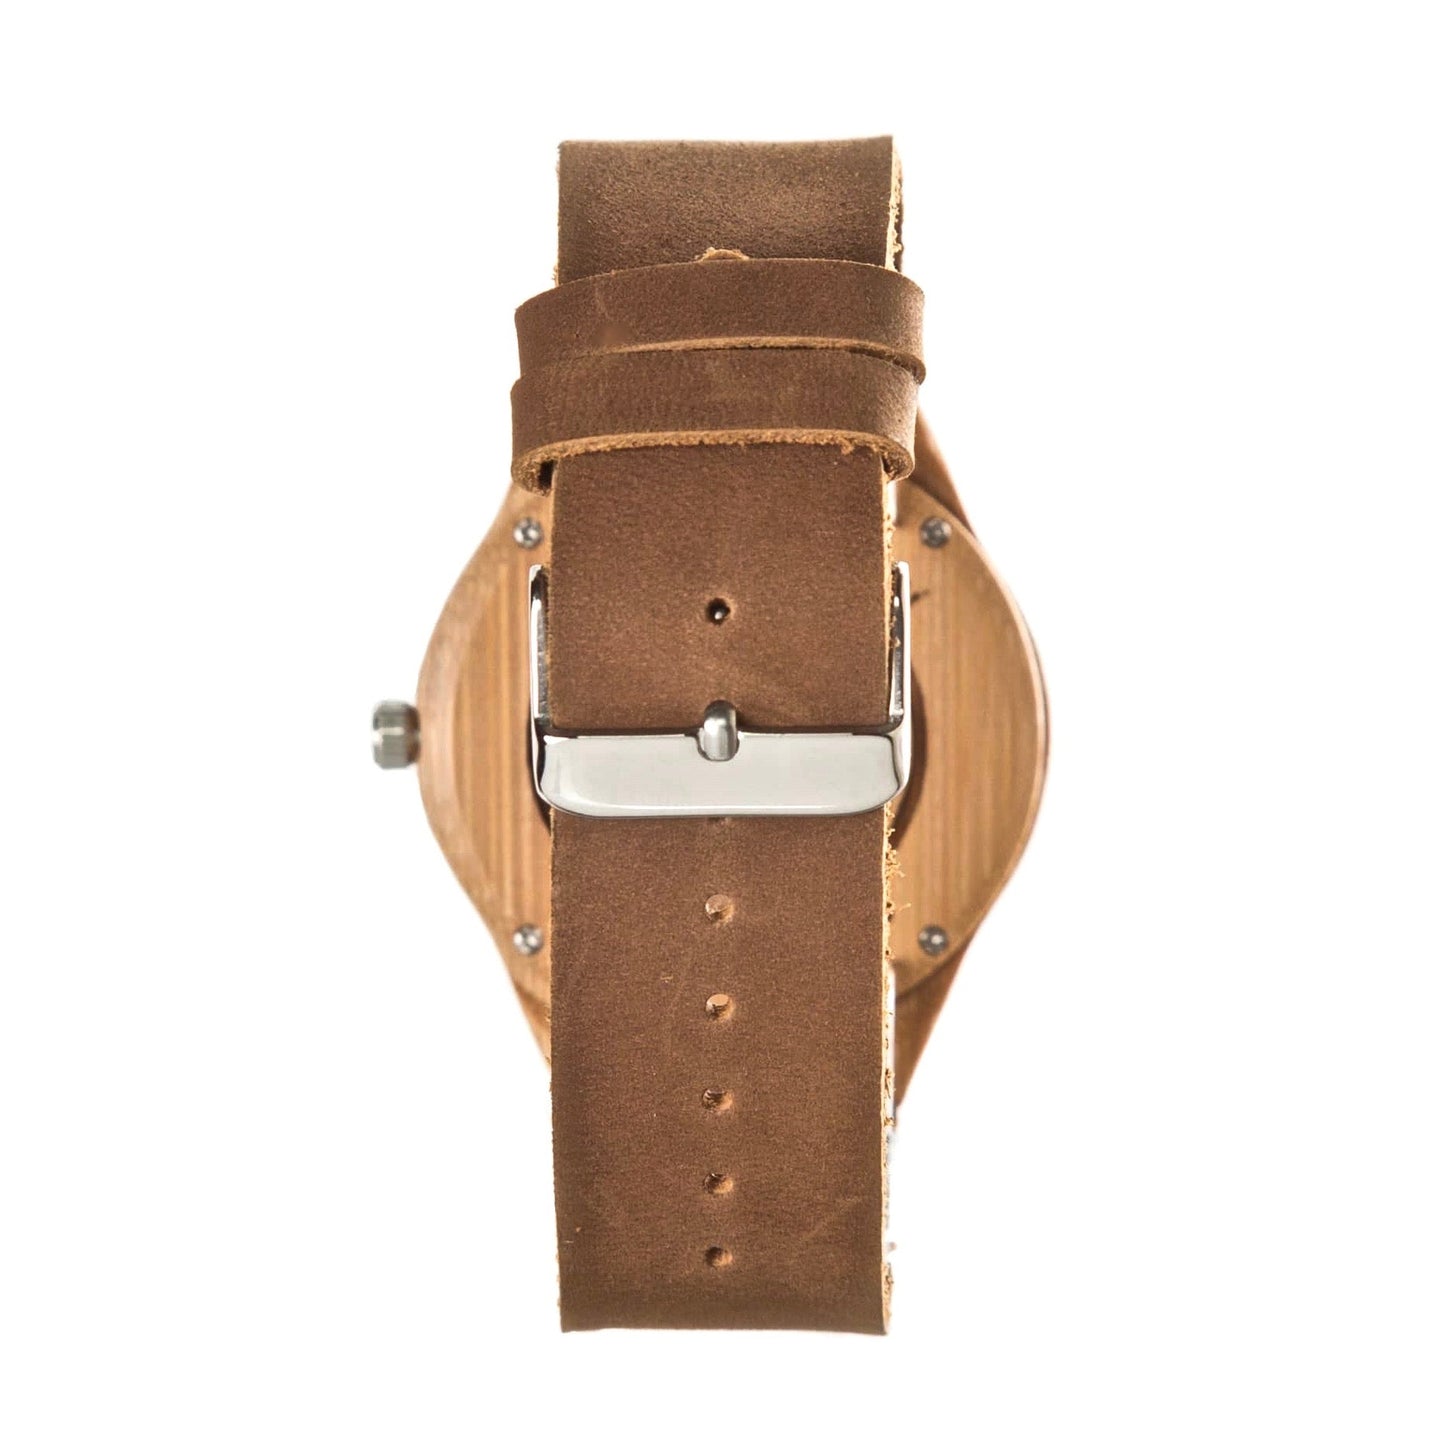 Branded Bamboo Classic Watch - Clasp and Back View